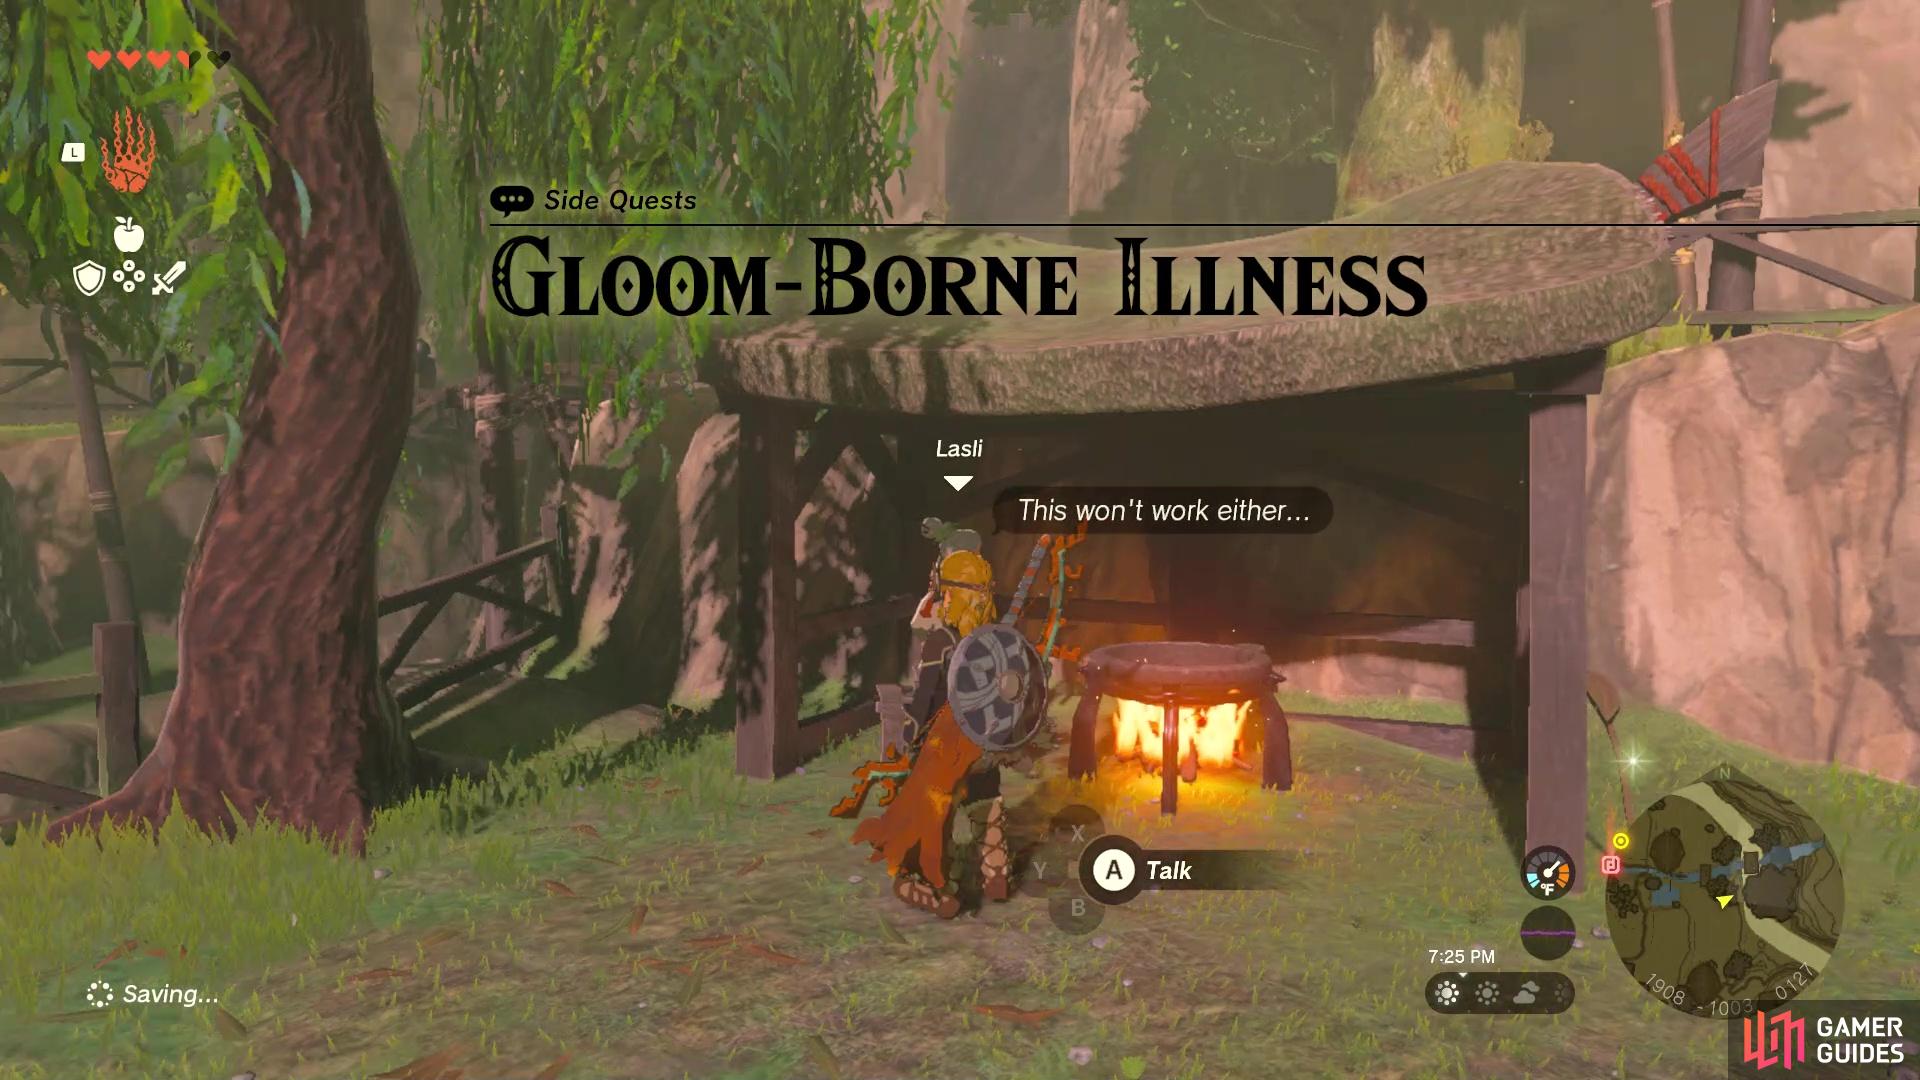 This side quest has you help someone stricken with gloom sickness